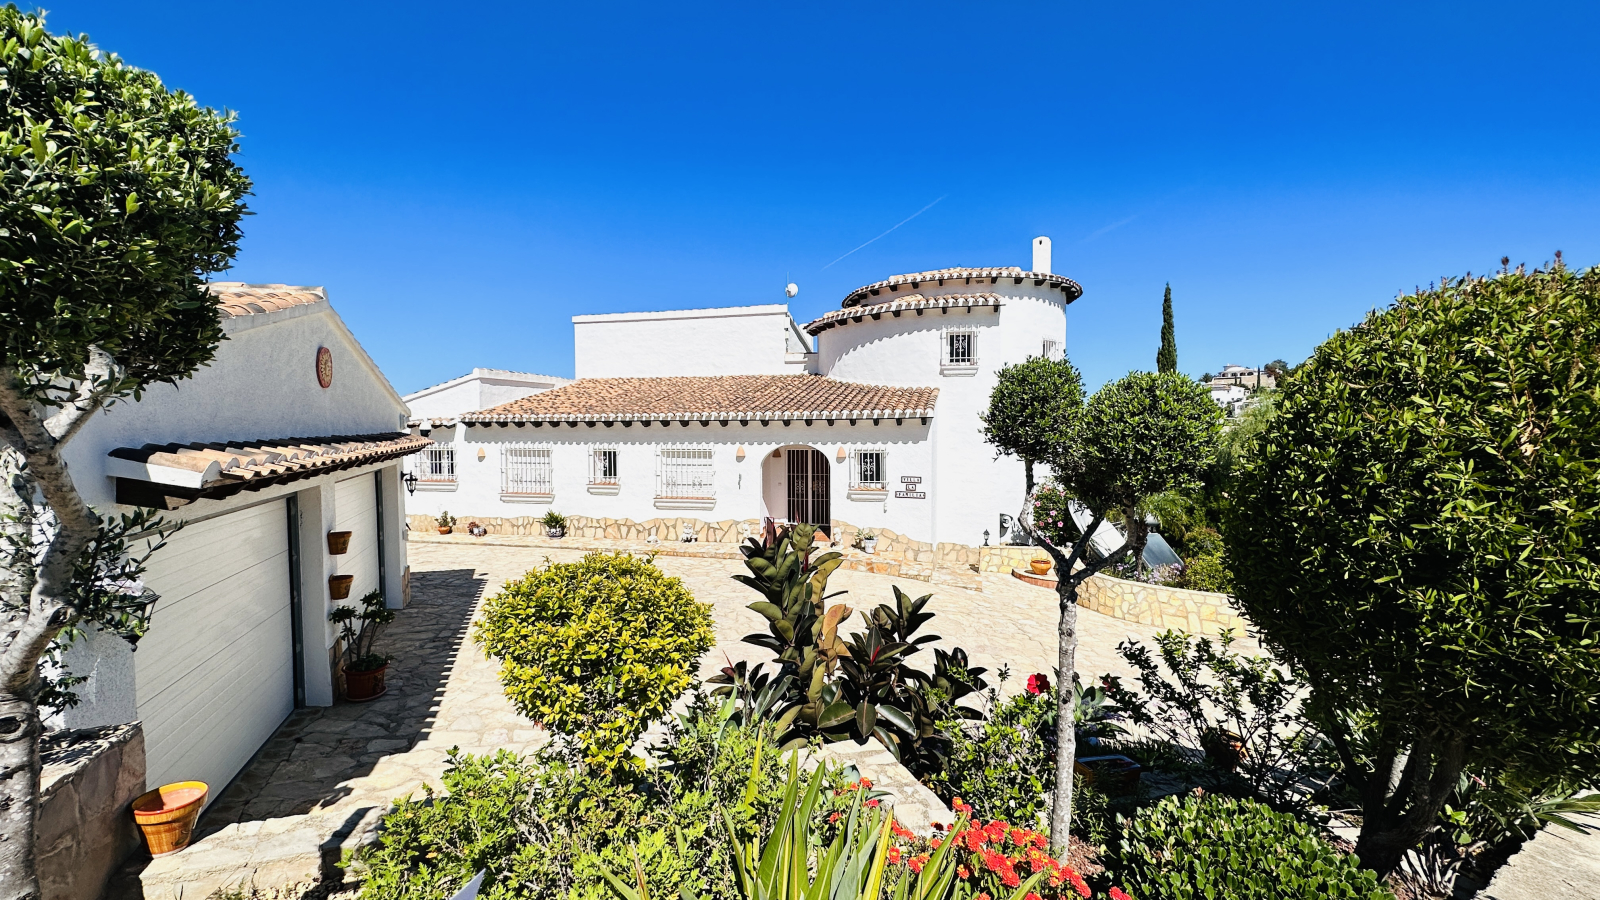 Spacious villa for 2-3 families, top sea view, double garage, many extras 